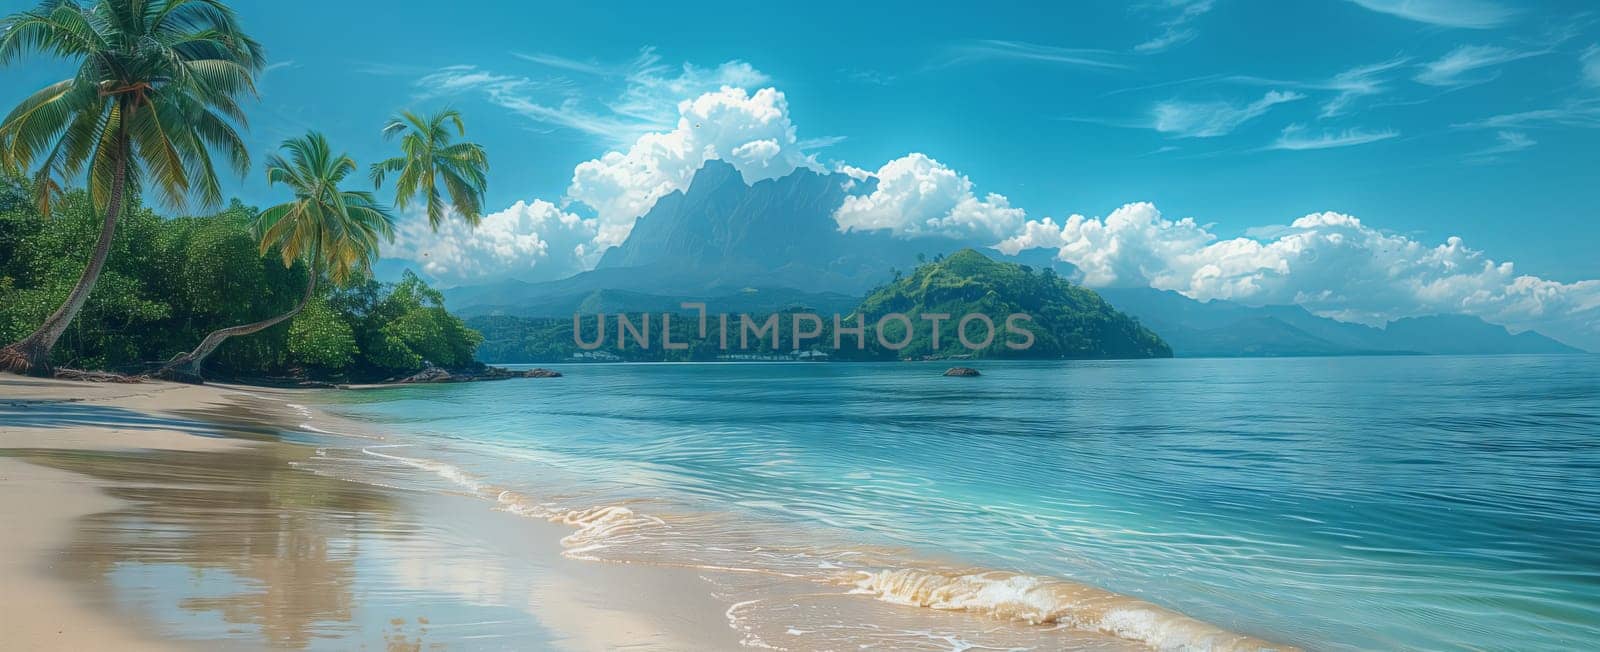 A picturesque natural landscape featuring a tropical beach with palm trees, a majestic mountain in the background, and fluffy cumulus clouds hovering in the sky